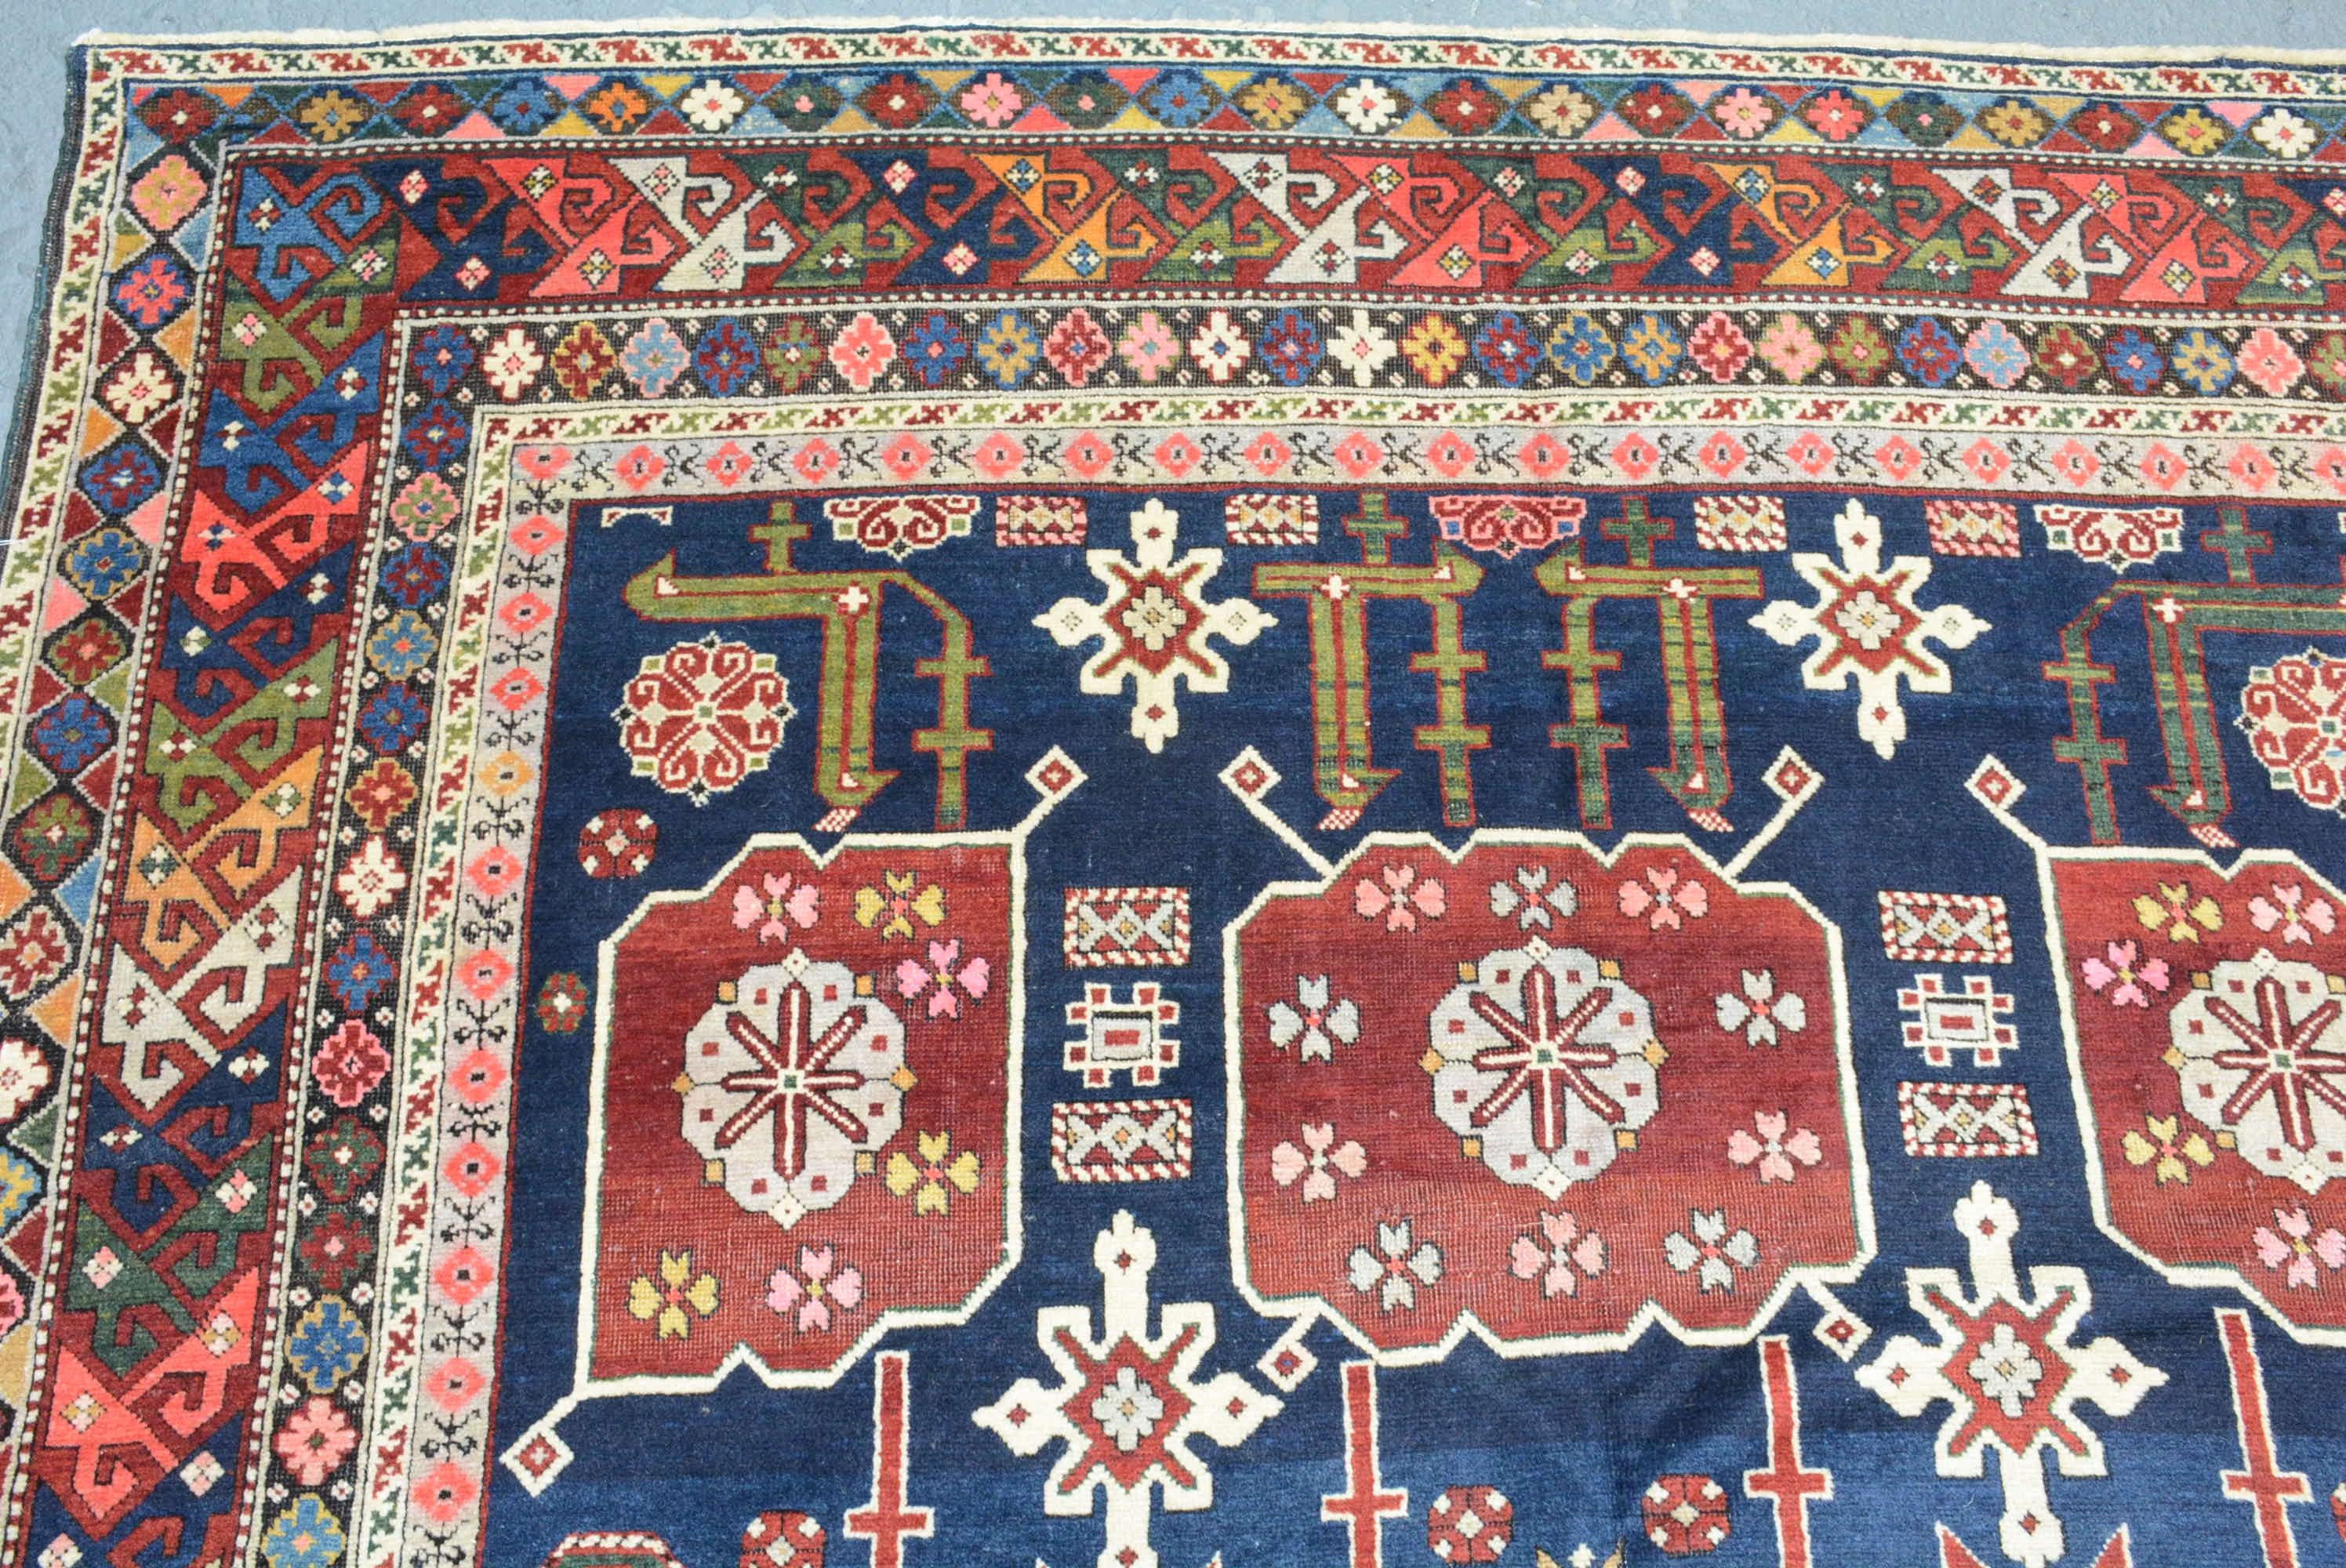 Kuba is the largest rug weaving centre in the Caucasus region. Located in the northeast near the Caspian Sea, this area is known for producing rugs with medium-density, low piles on solid foundations. Karagashli is a small town in the northern part